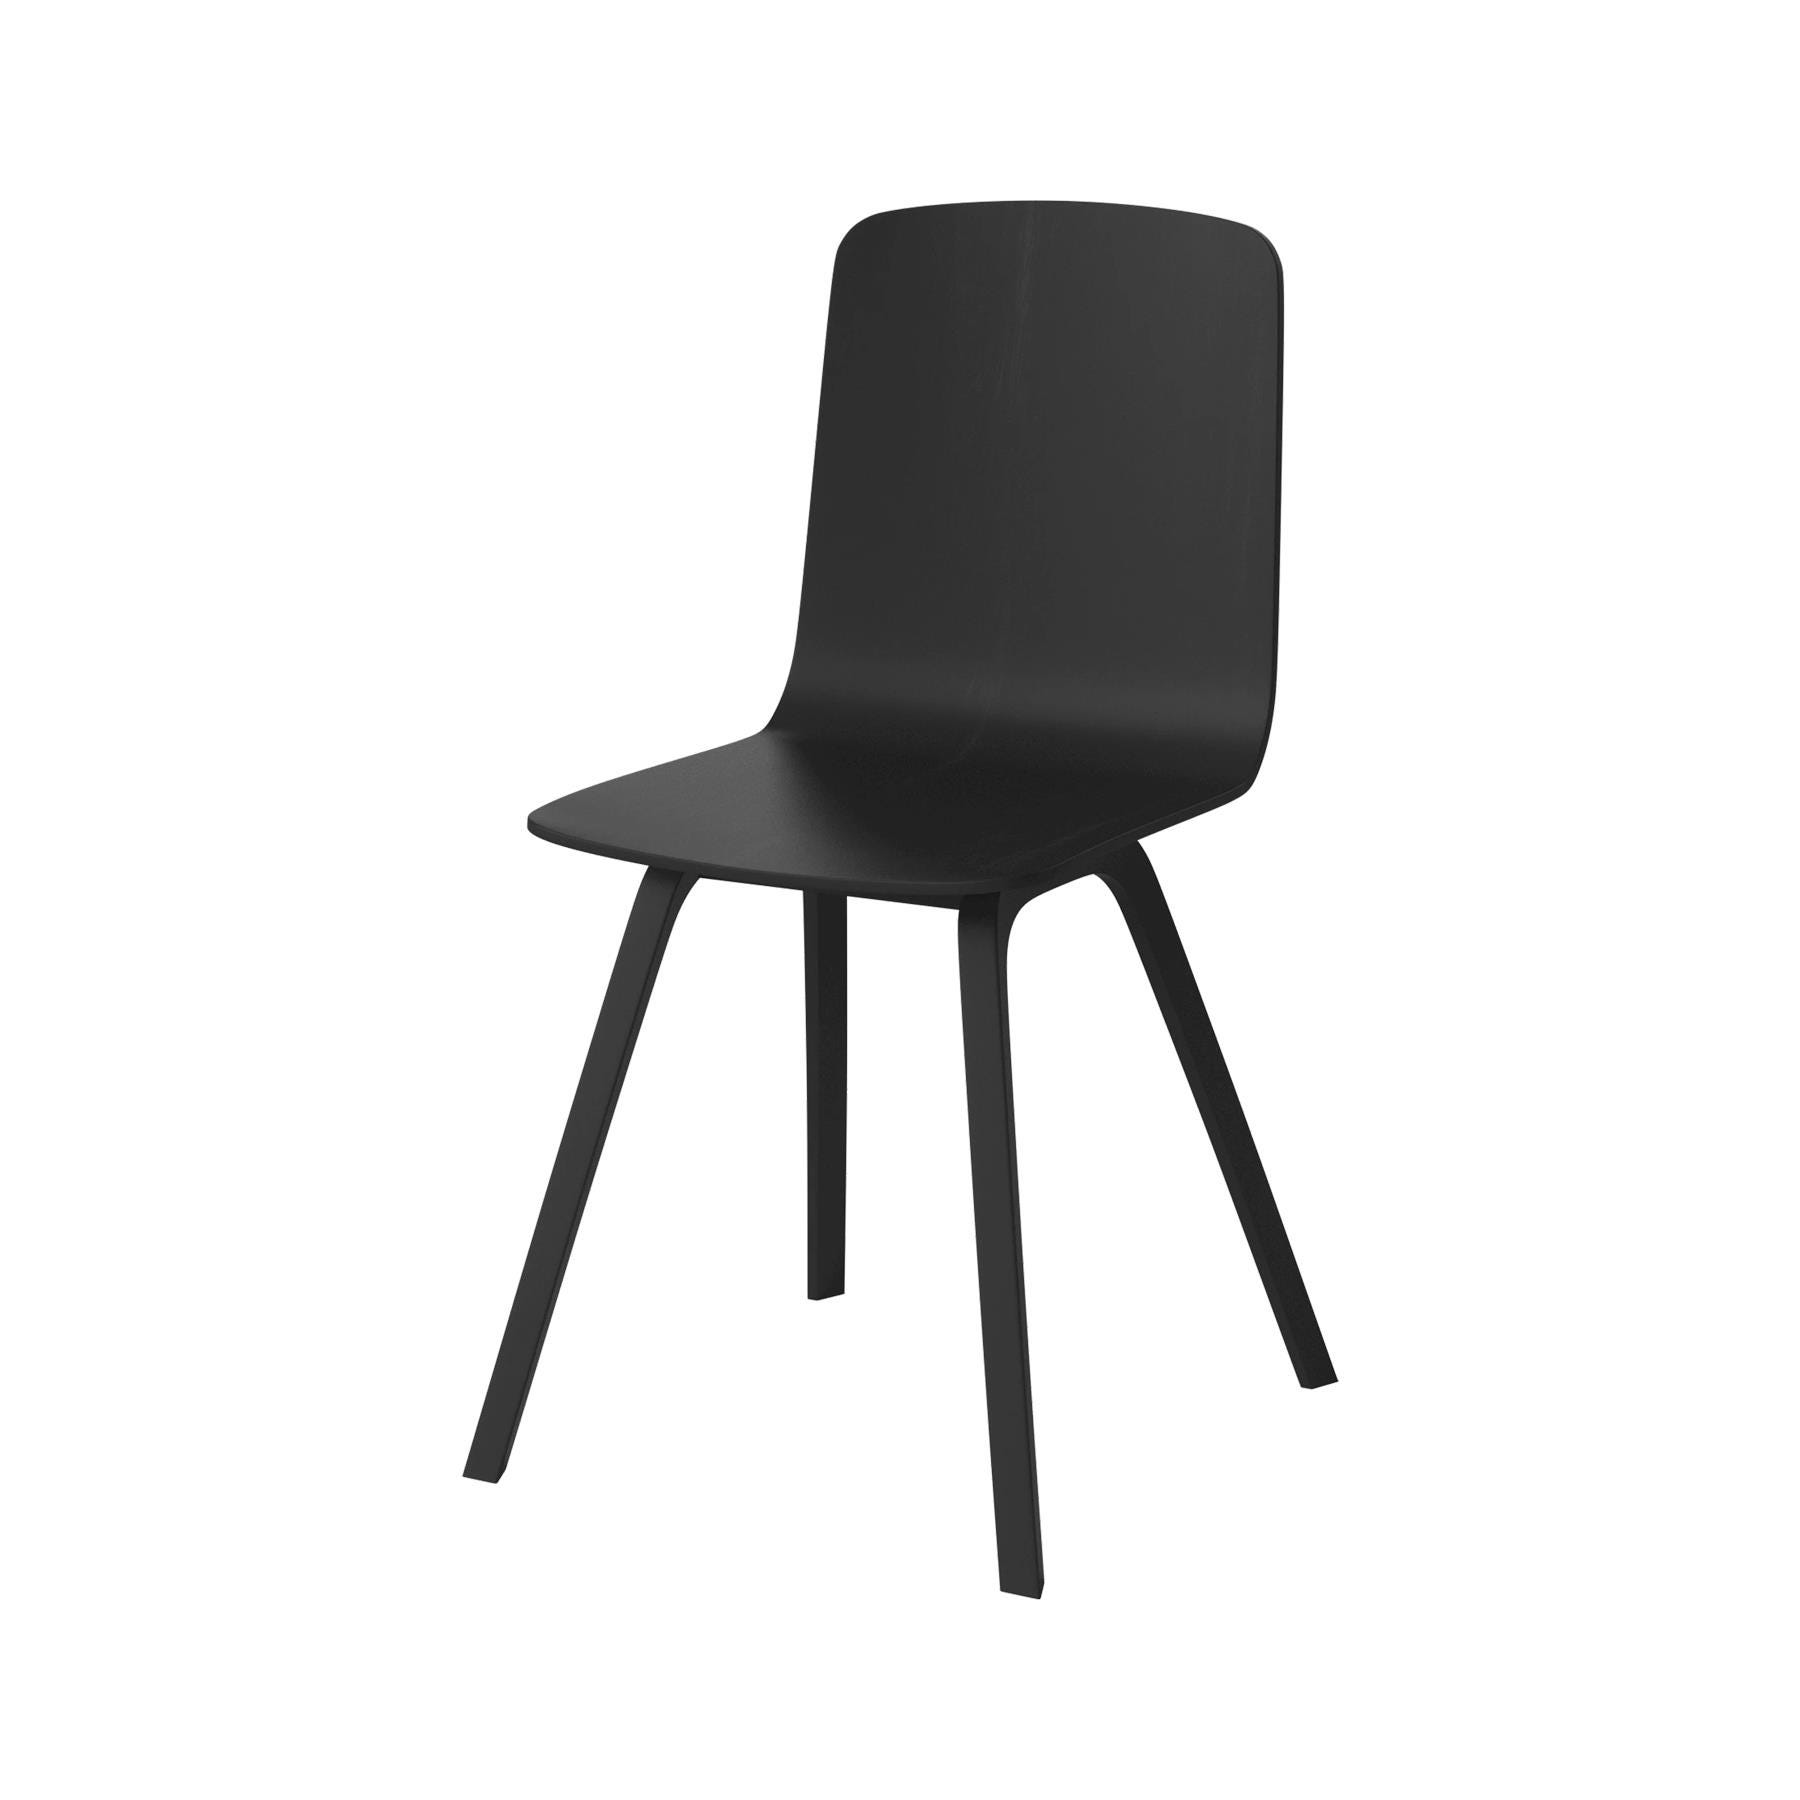 Bolia Palm Dining Chair Wood Veneer Legs Black Laquered Oak Designer Furniture From Holloways Of Ludlow